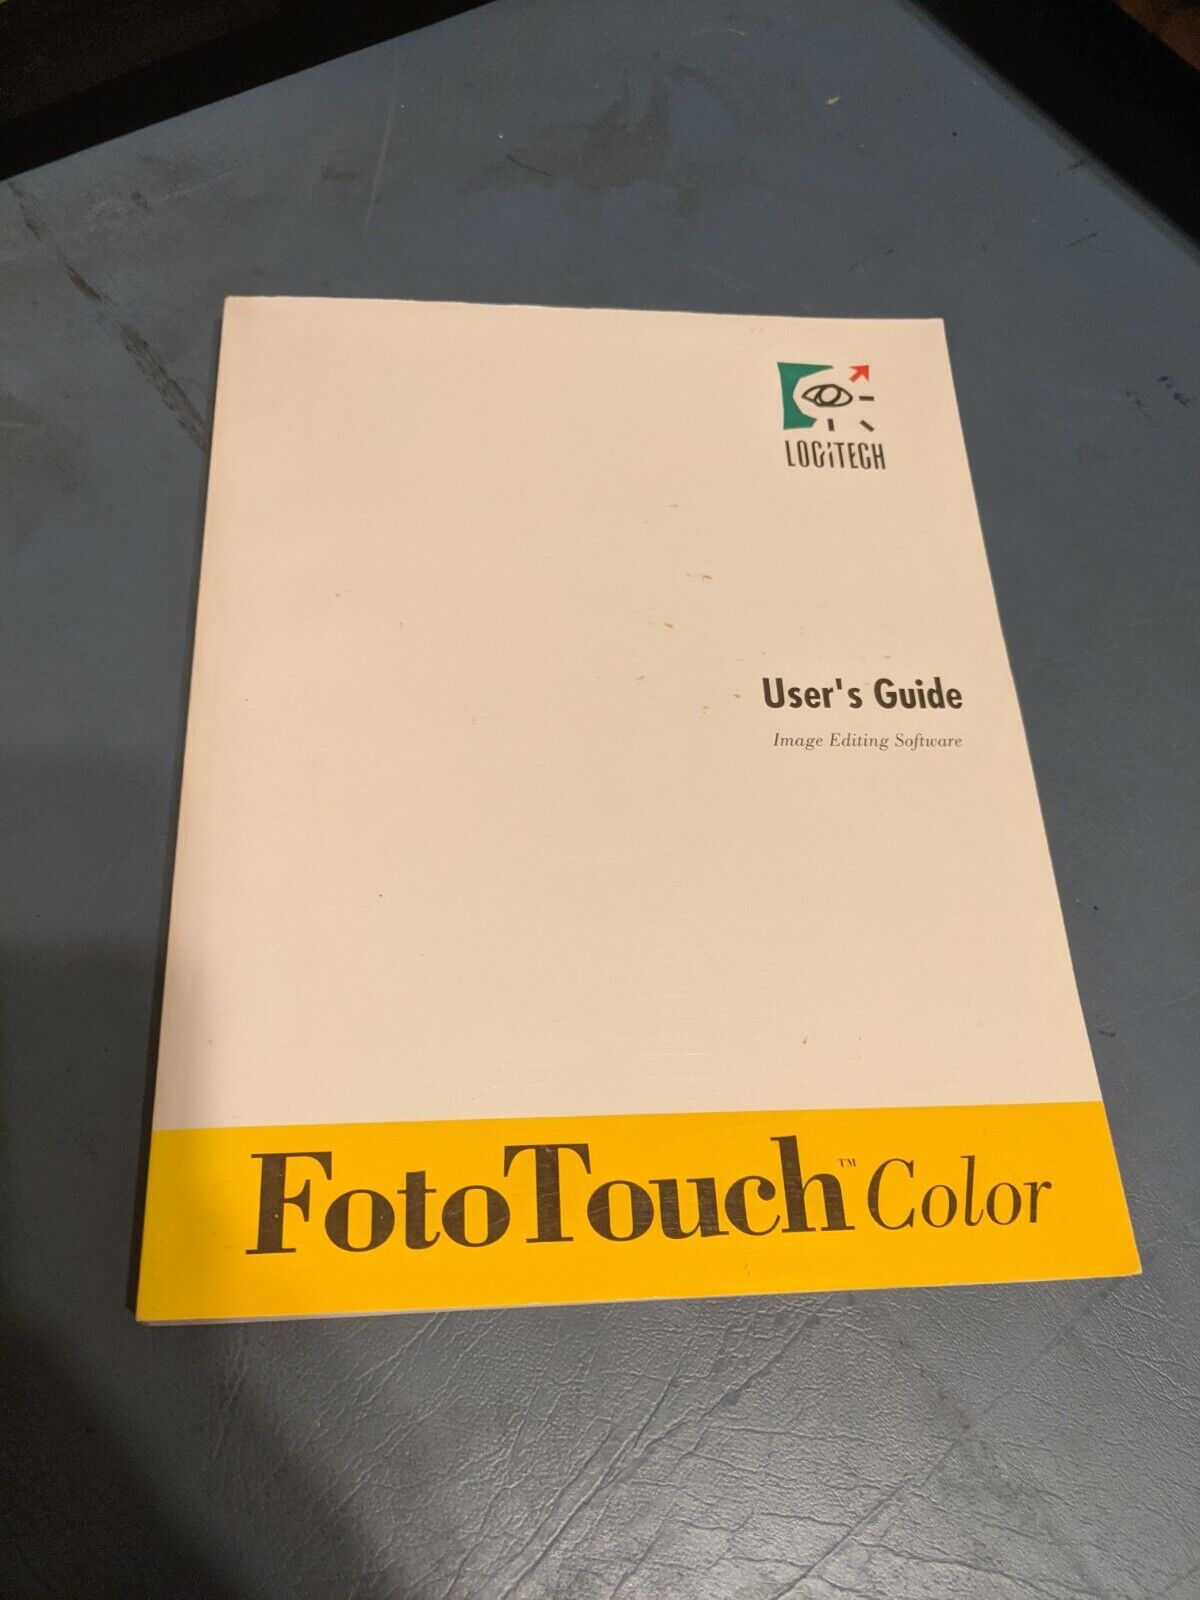 *Vintage* Logitech Foto touch color Image editing software Users Guide 1993